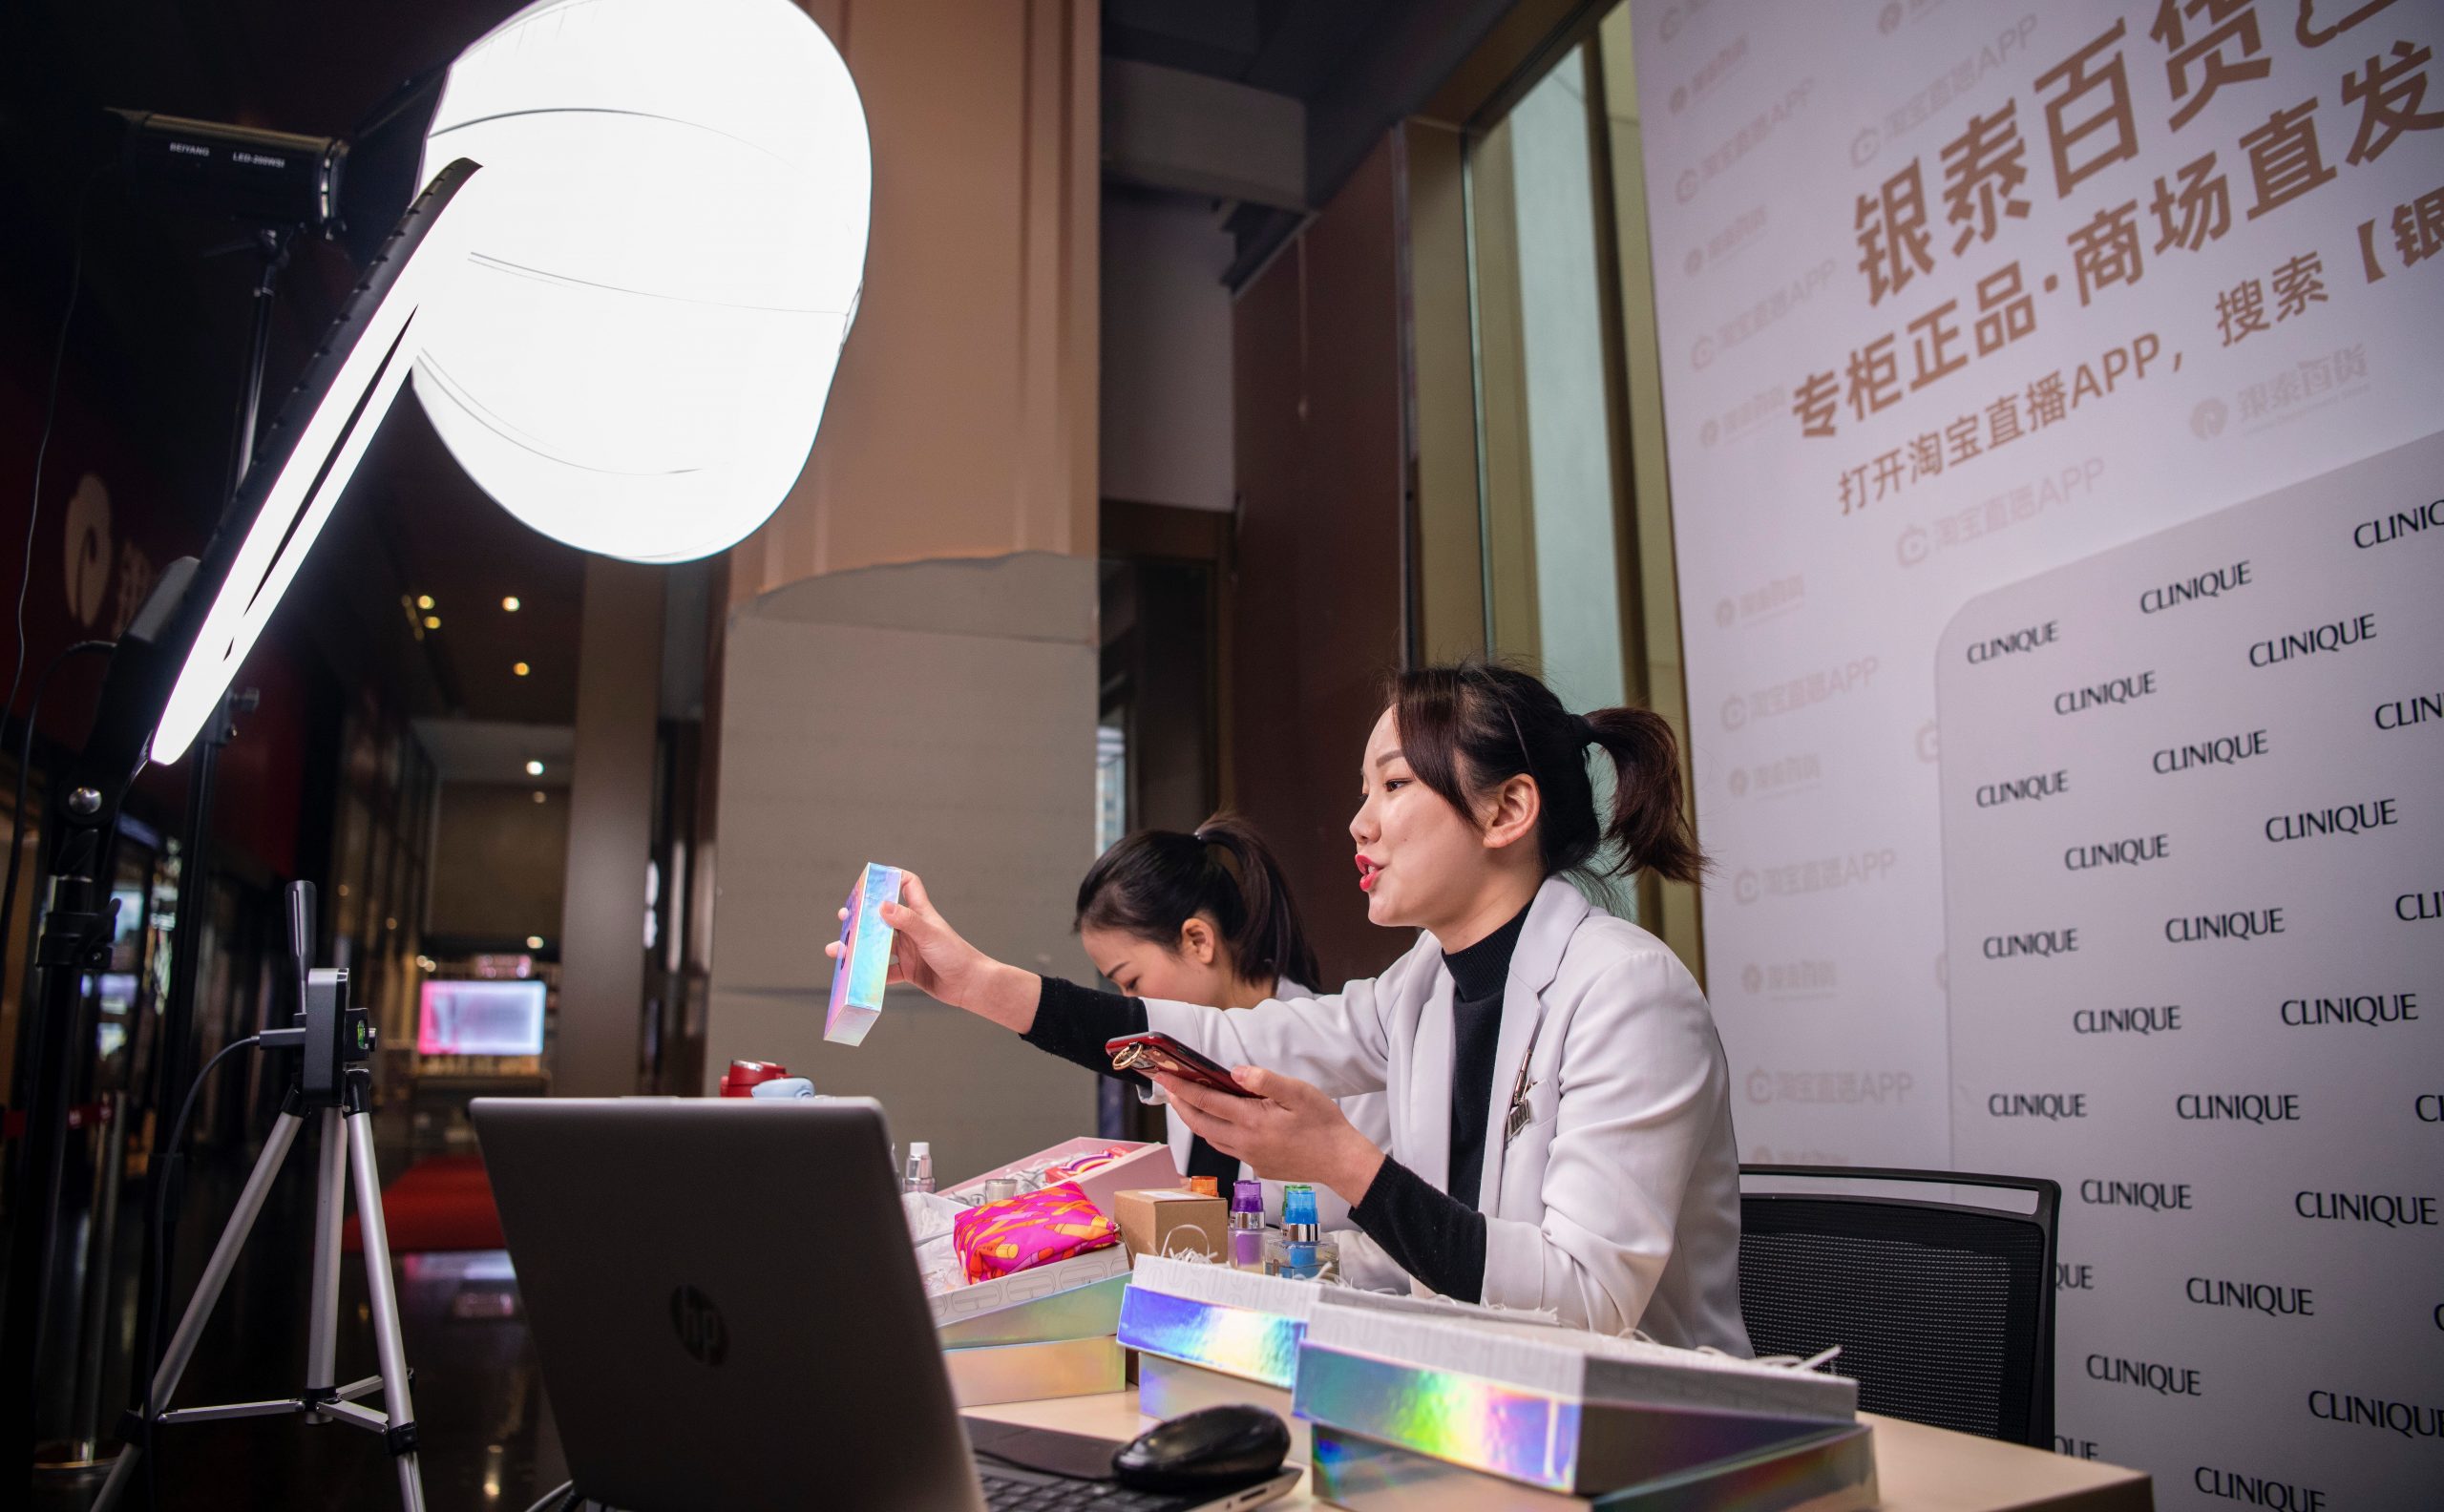 New leaders emerge in China’s video apps, Kuaishou recordsdata for IPO